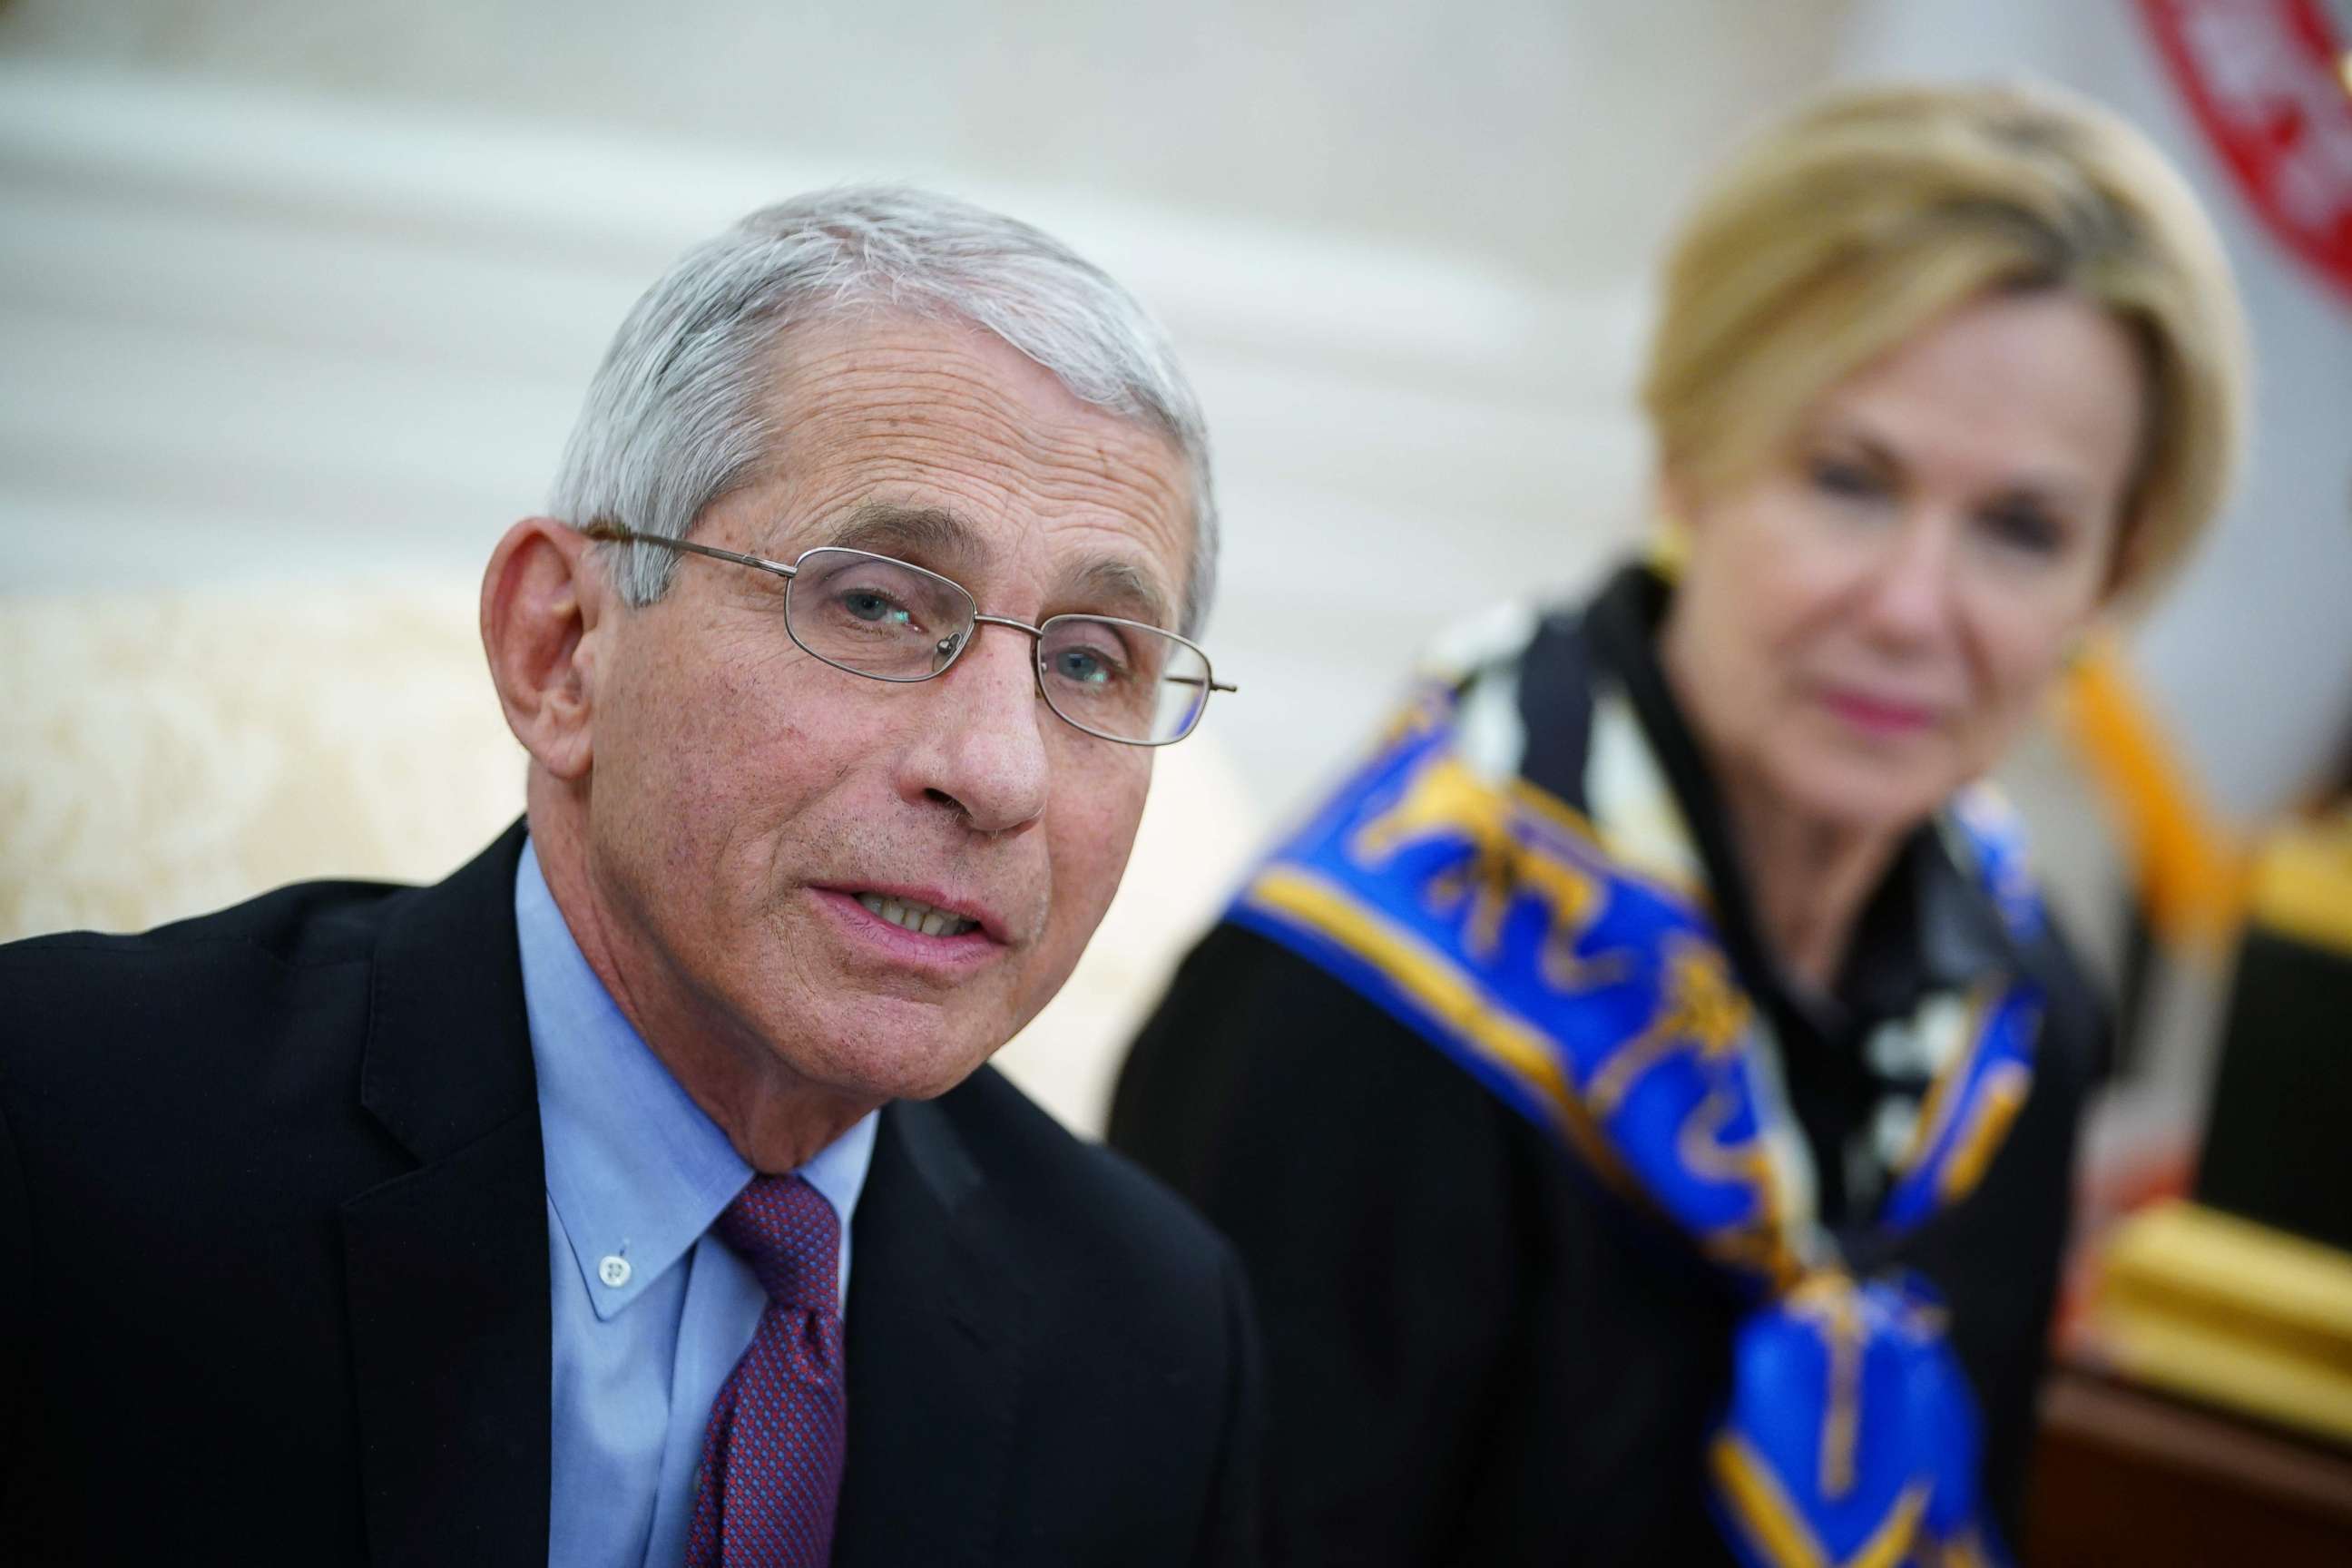 PHOTO: Dr. Anthony Fauci, director of the National Institute of Allergy and Infectious Diseases speaks as President Donald Trump meets with Gov. John Bel Edwards of Louisiana, in the Oval Office of the White House in Washington, April 29, 2020.